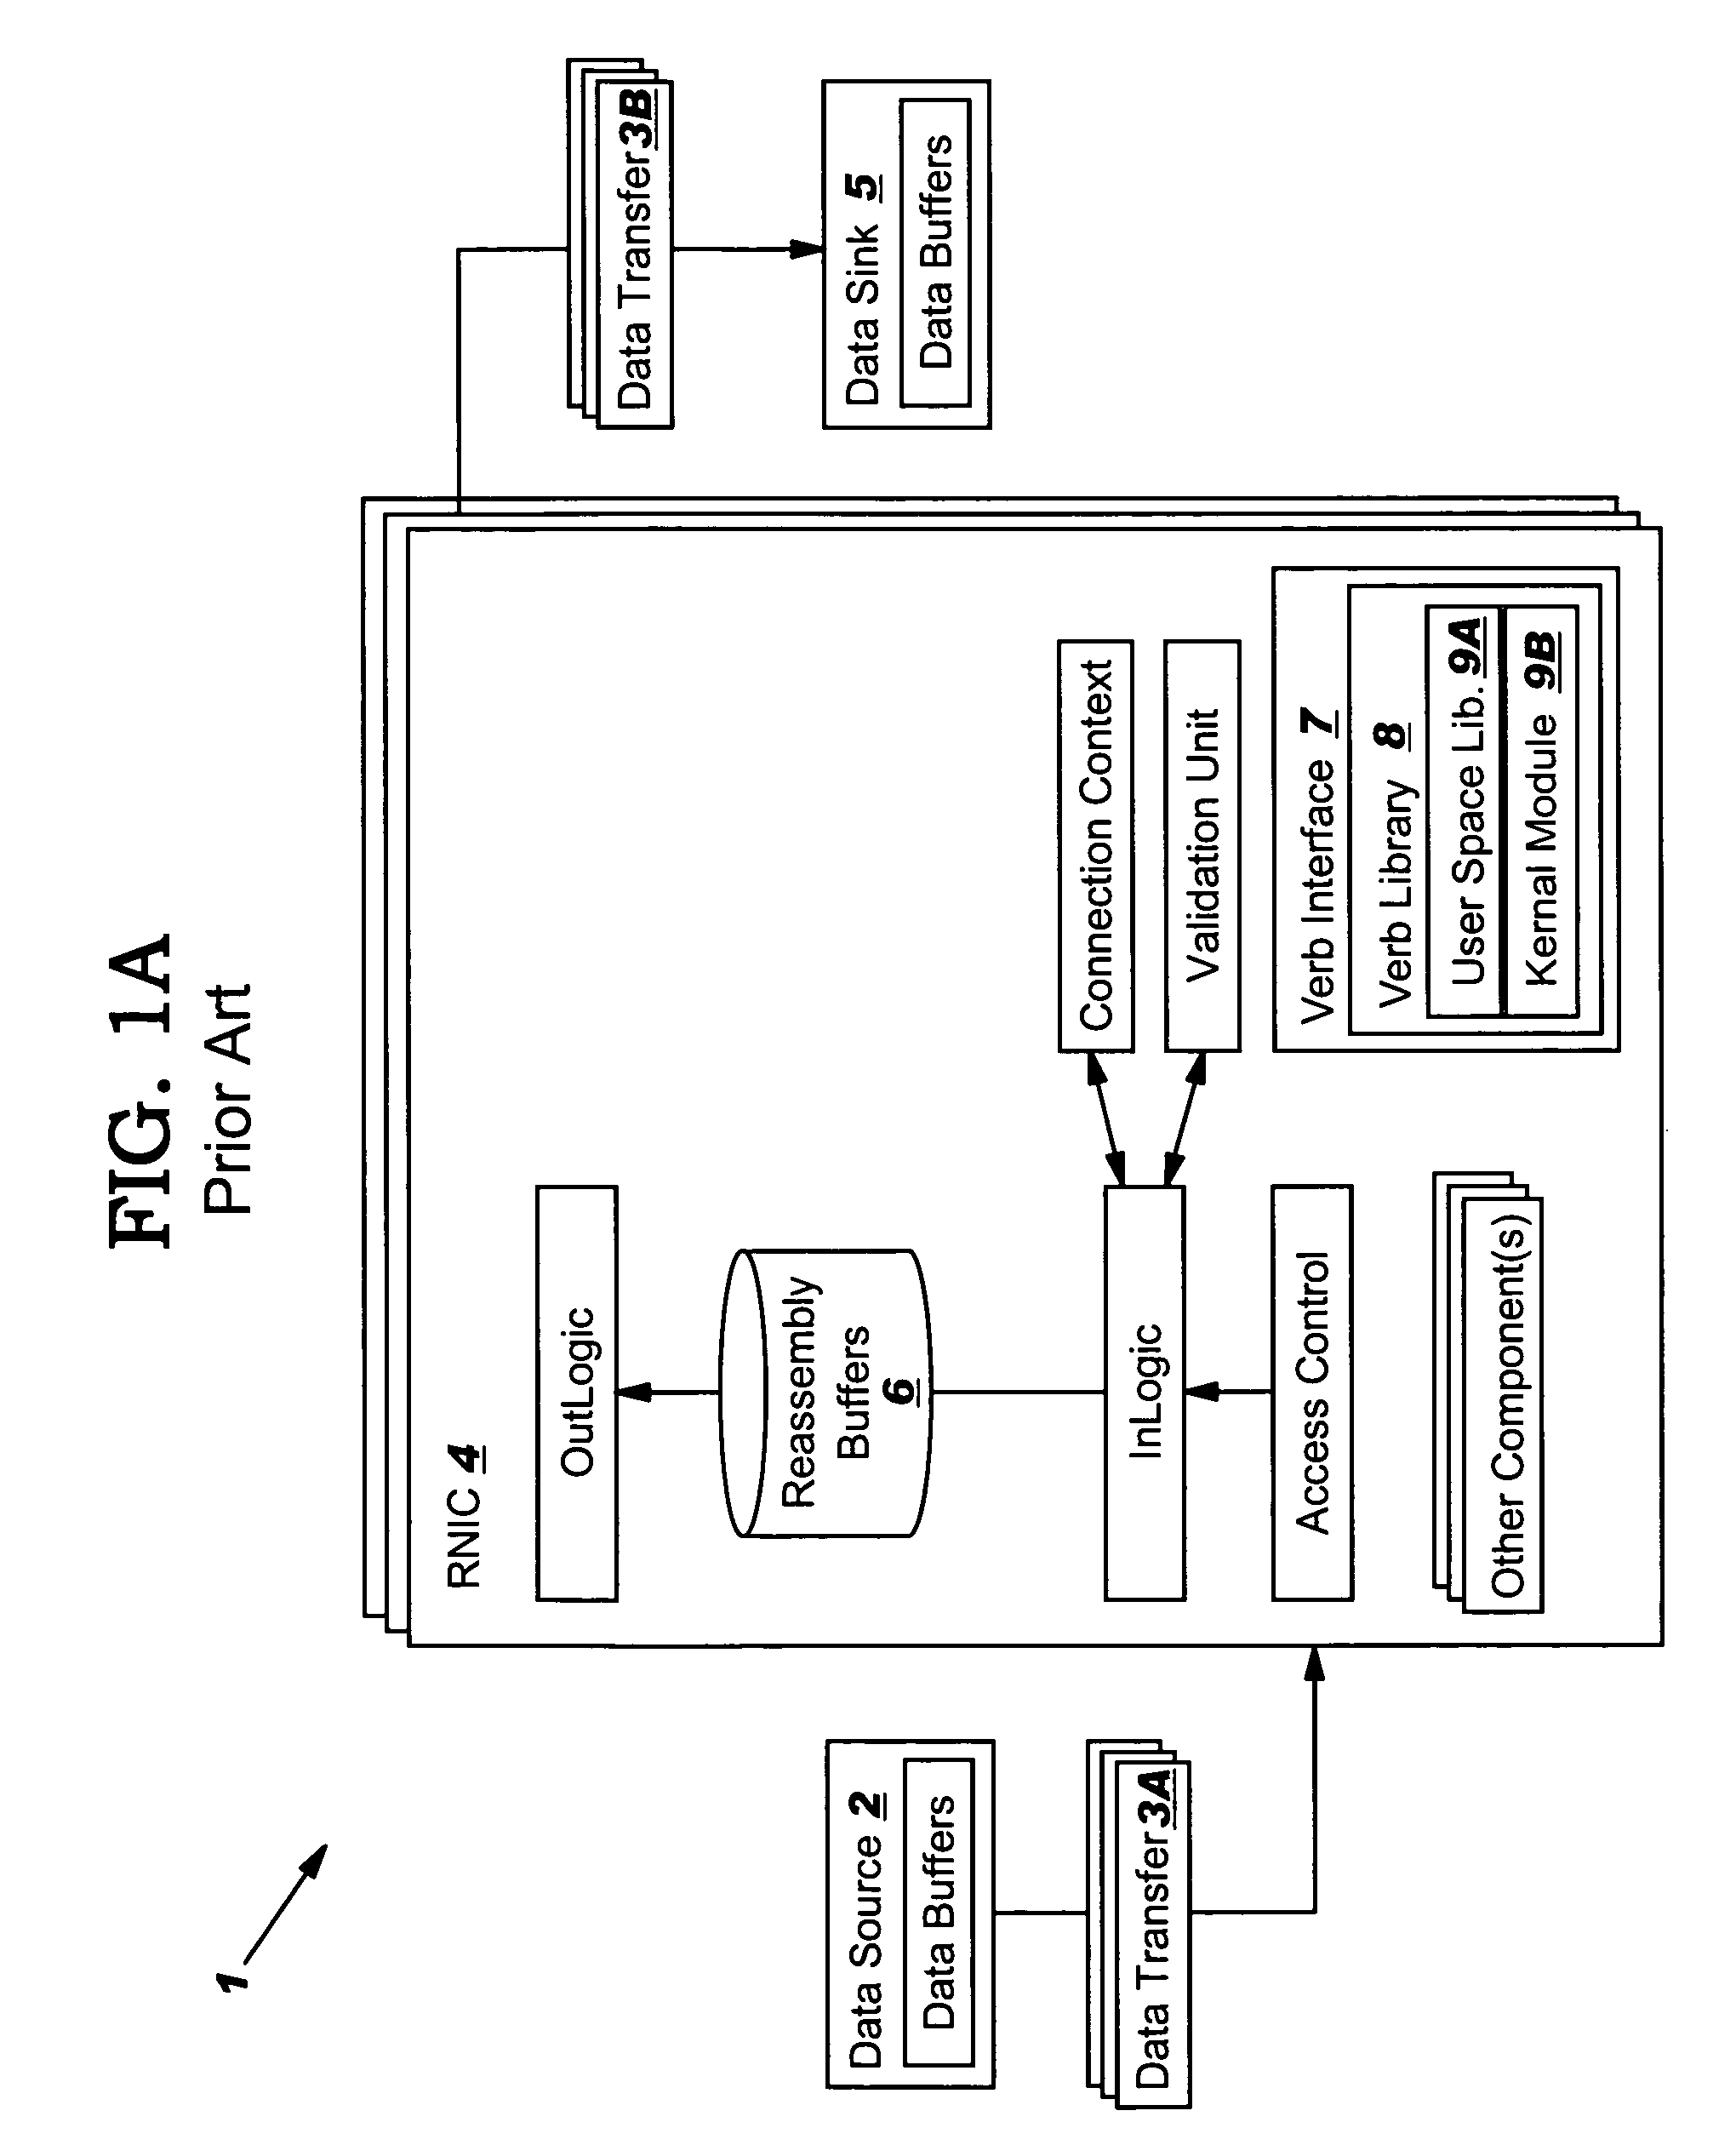 RDMA network interface controller with cut-through implementation for aligned DDP segments